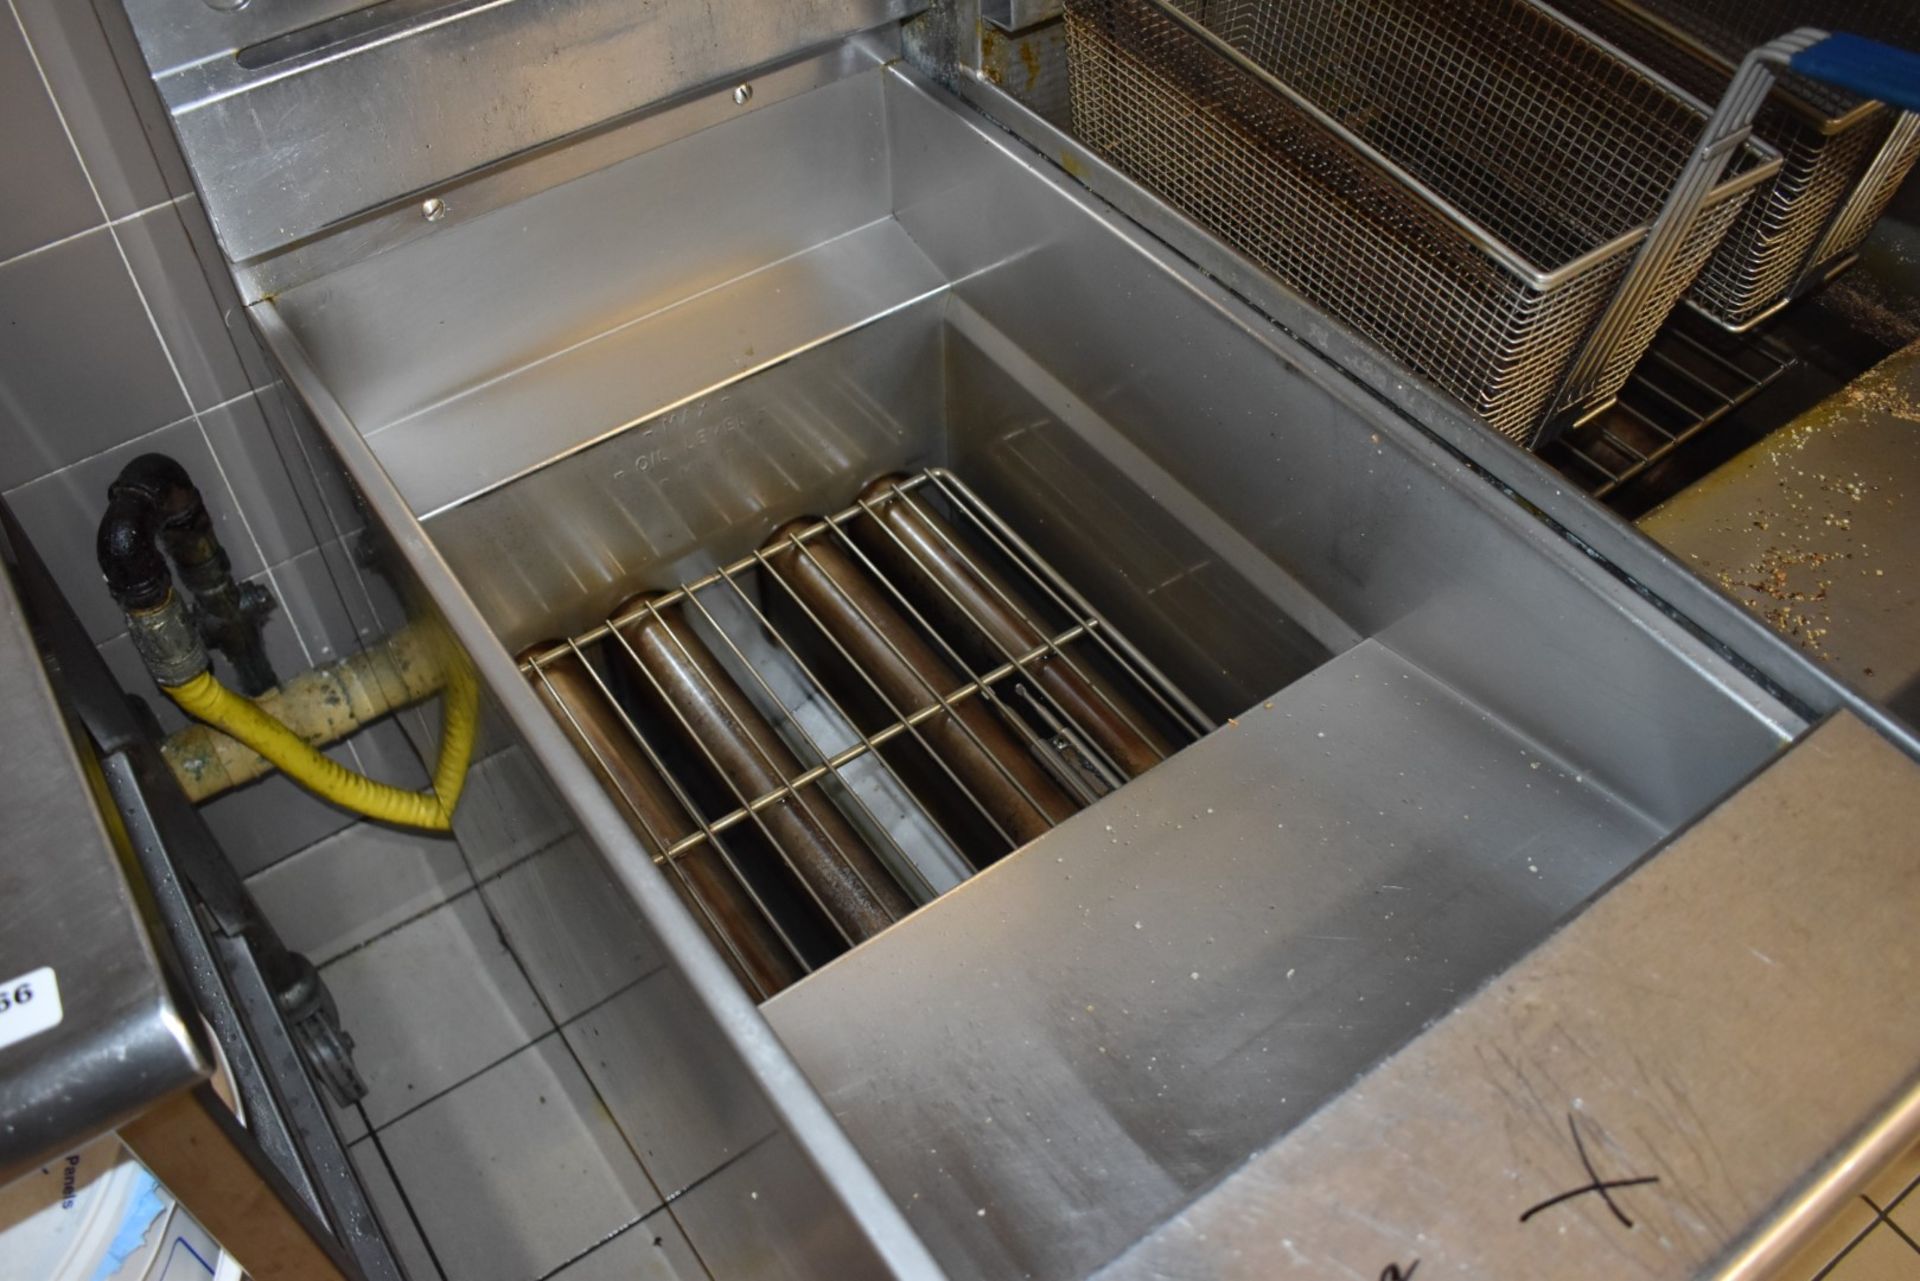 1 x Pitco Twin Basket Single Chamber Commercial Fryer - Natural Gas Stainless Steel Fryer - H85 x - Image 4 of 7